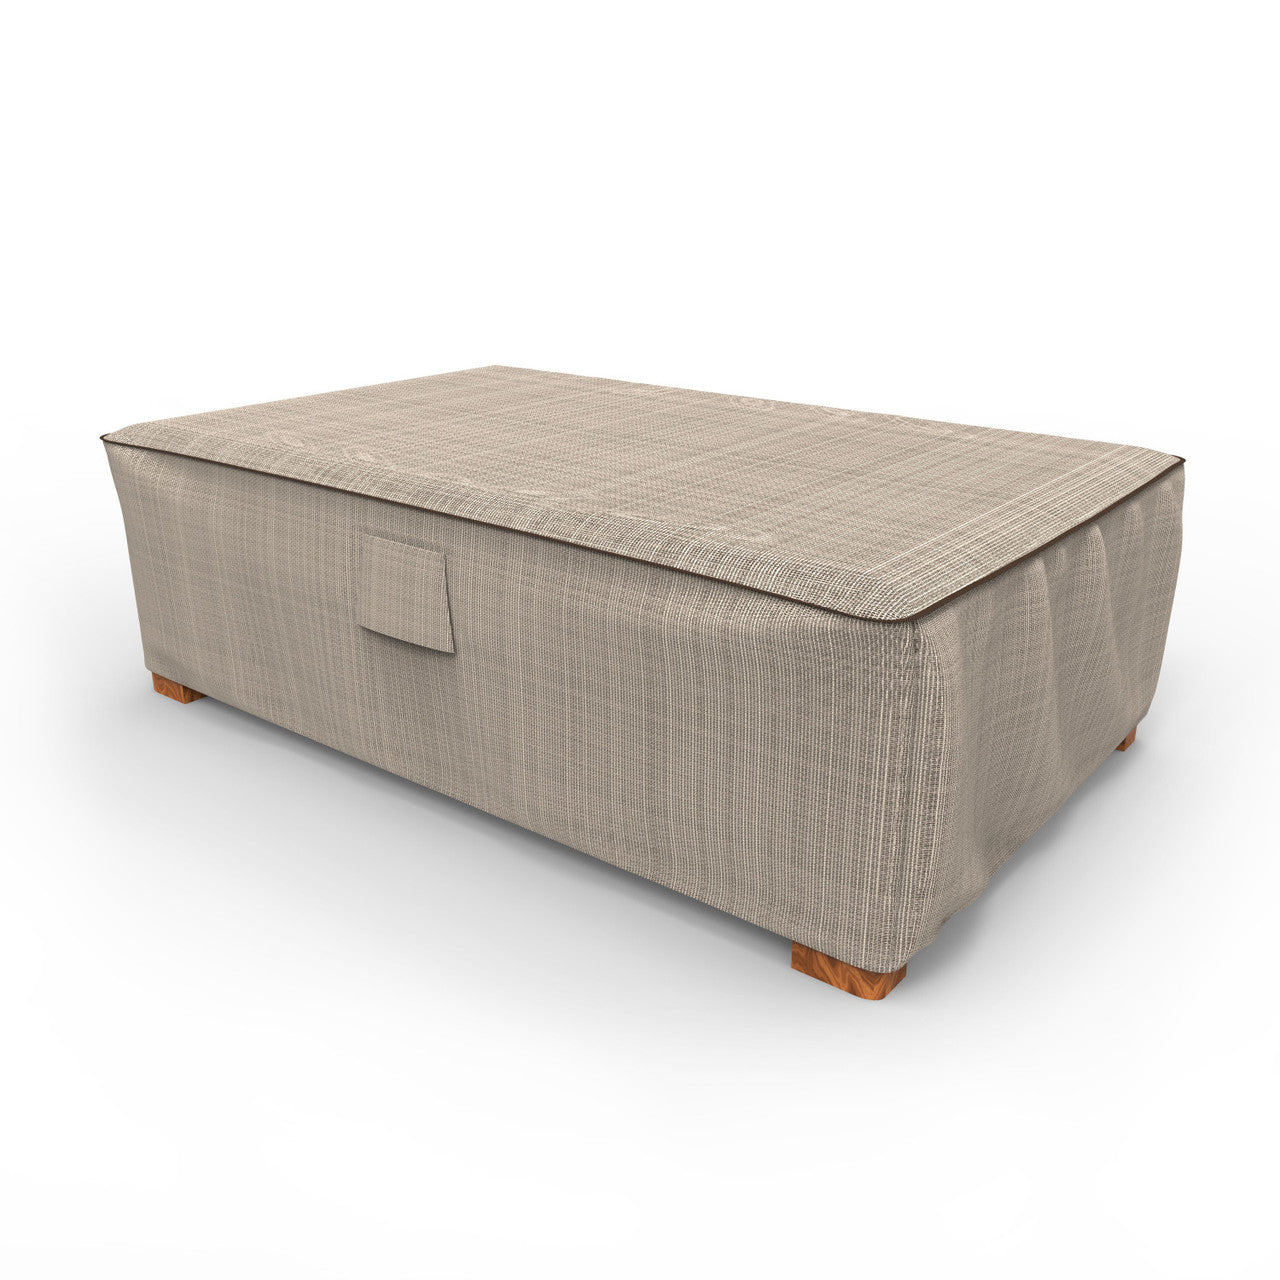 Budge Industries English Garden Patio Ottoman/Coffee Table Cover - Large